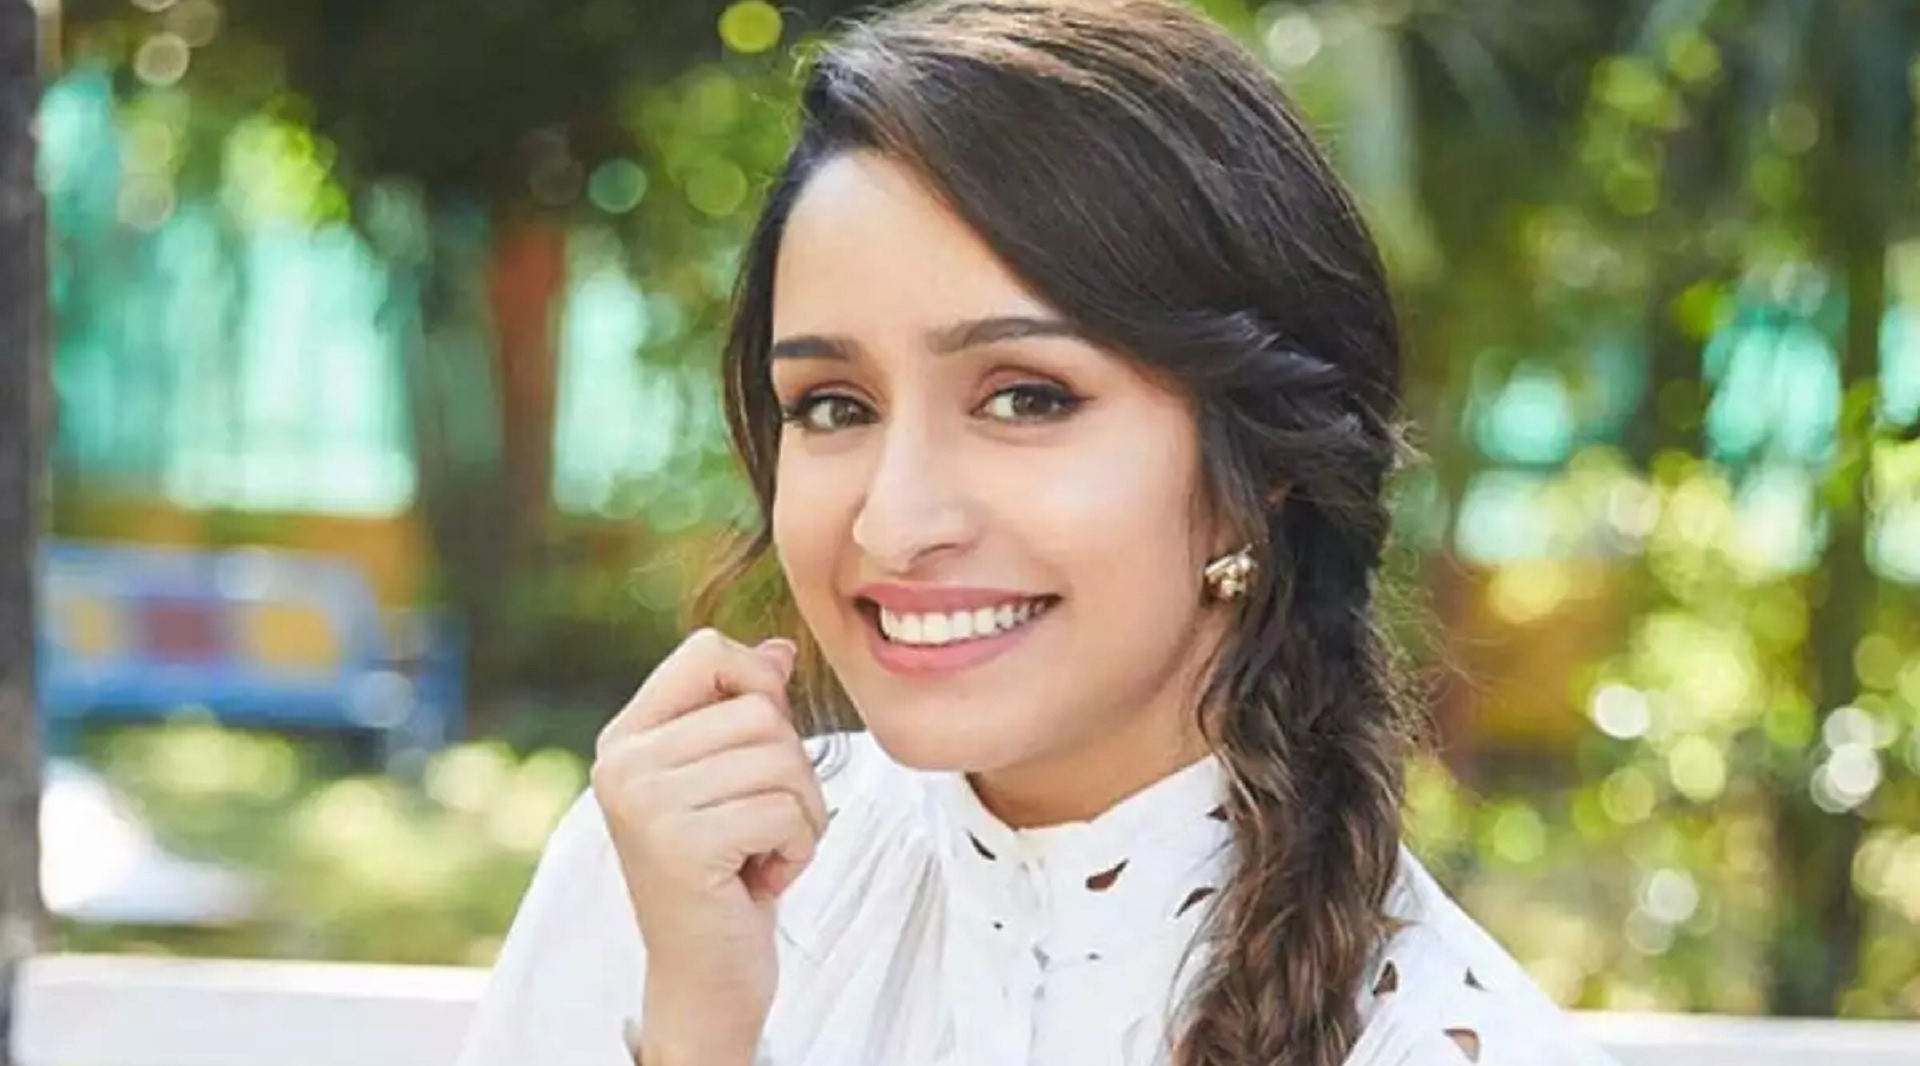 Shraddha Kapoor Now The 2nd Most Followed Indian Actress On Instagram, Guess Who’s 1st?